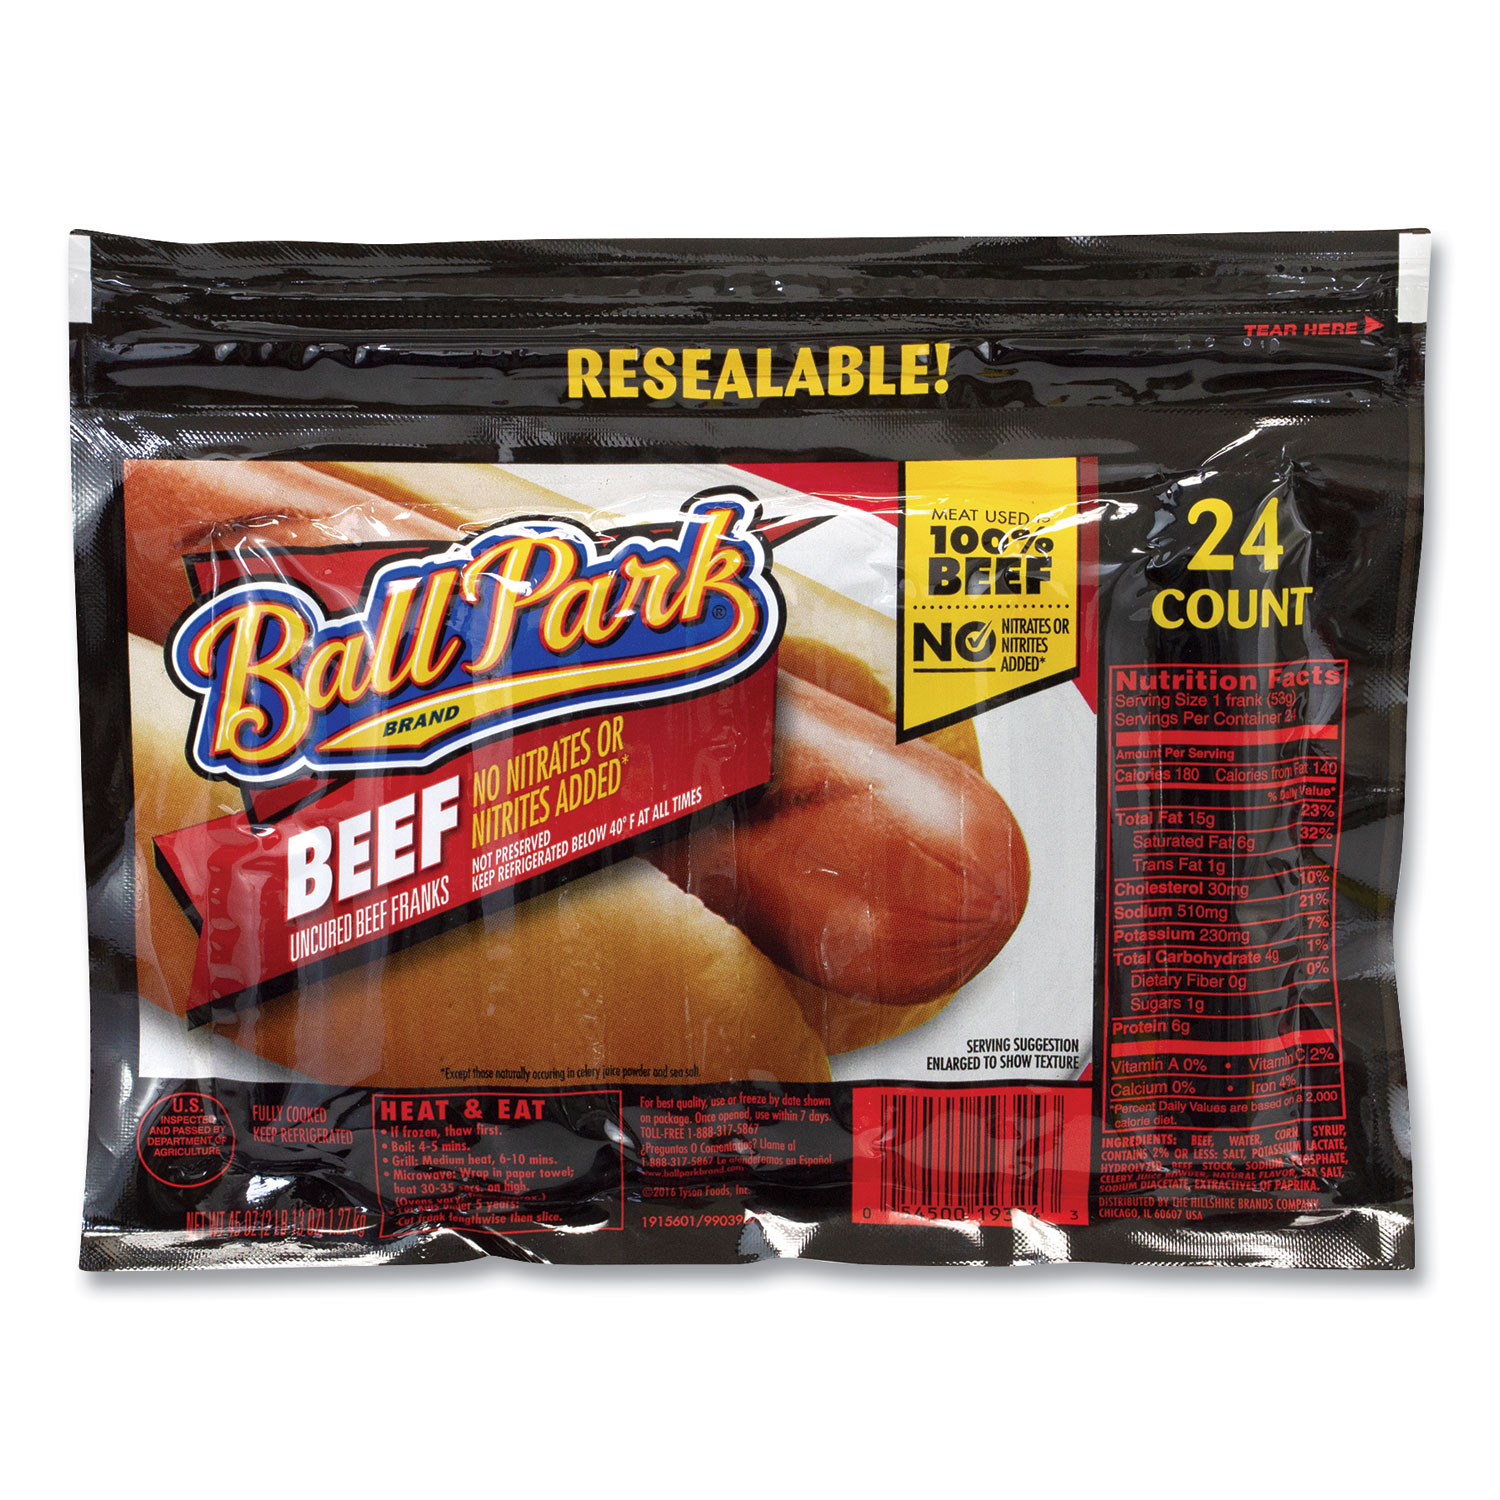  Ball Park Brand 19324 Beef Franks Hot Dogs, 45 oz Pack, 24/Pack, Free Delivery in 1-4 Business Days (GRR90200092) 